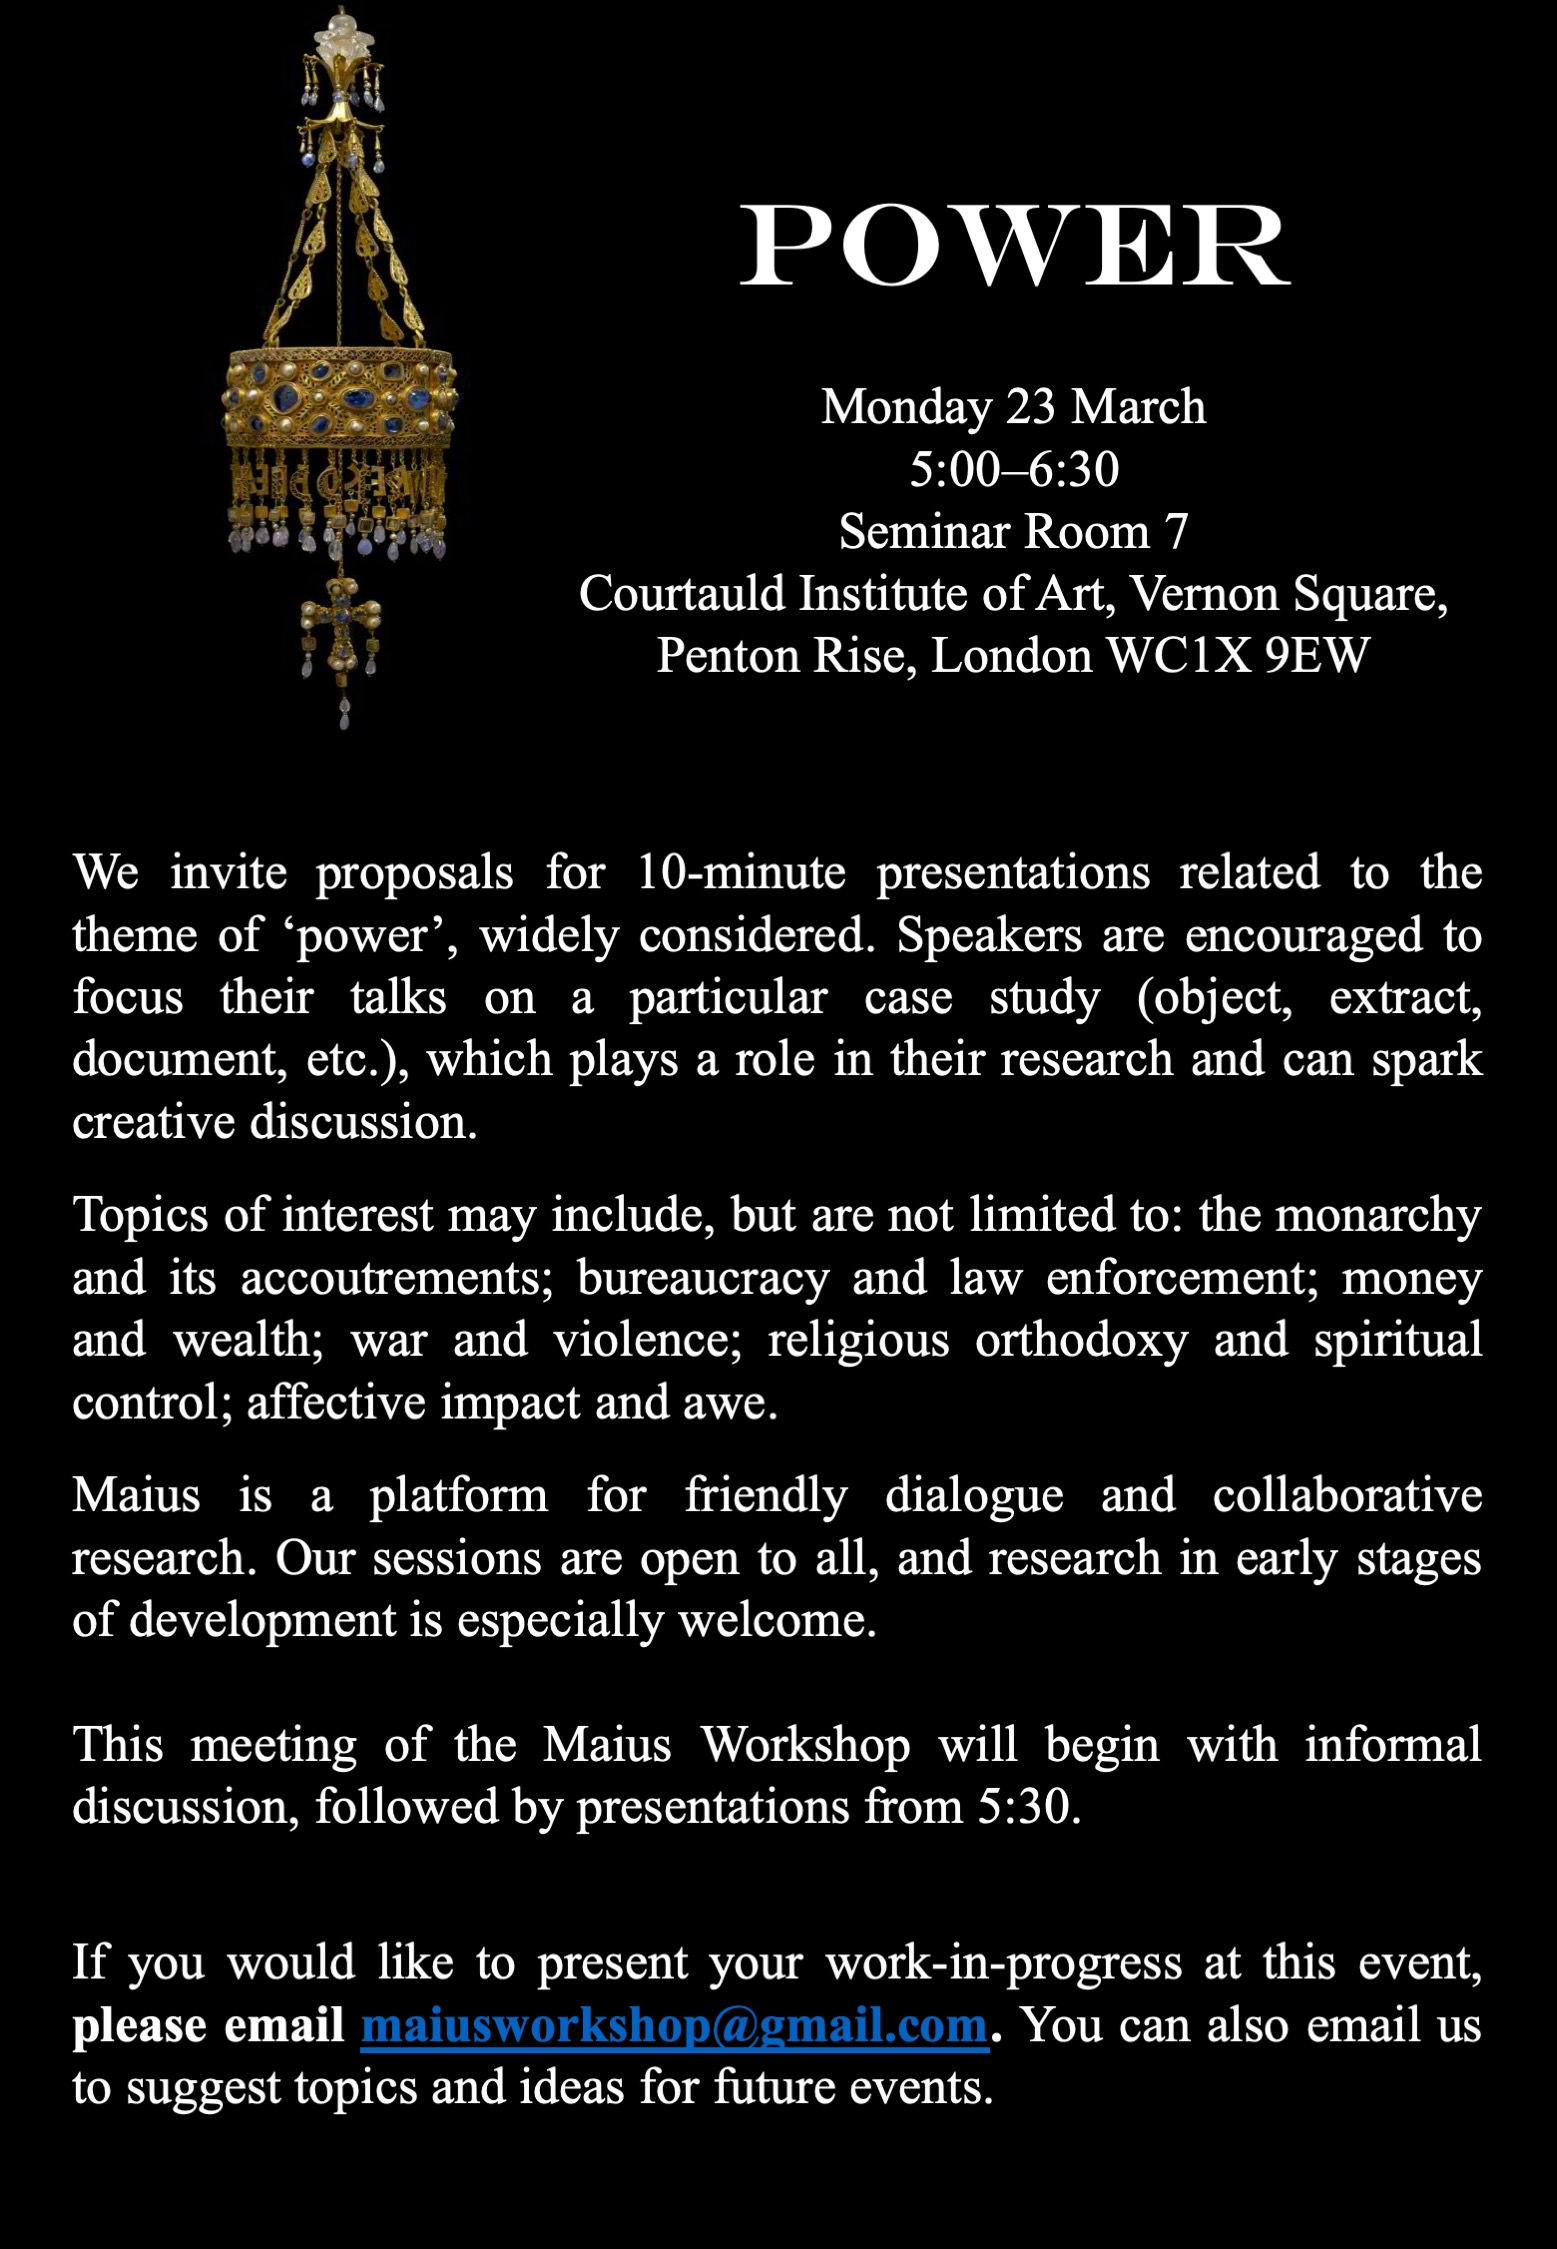 We invite proposals for 10-minute presentations related to the theme of ‘power’, widely considered. Speakers are encouraged to focus their talks on a particular case study (object, extract, document, etc.), which plays a role in their research and can spark creative discussion.  Topics of interest may include, but are not limited to: the monarchy and its accoutrements; bureaucracy and law enforcement; money and wealth; war and violence; religious orthodoxy and spiritual control; affective impact and awe.   Maius is a platform for friendly dialogue and collaborative research. Our sessions are open to all, and research in early stages of development is especially welcome.  This meeting of the Maius Workshop will begin with informal discussion, followed by presentations from 5:30.    If you would like to present your work-in-progress at this event, please email maiusworkshop@gmail.com. You can also email us to suggest topics and ideas for future events.